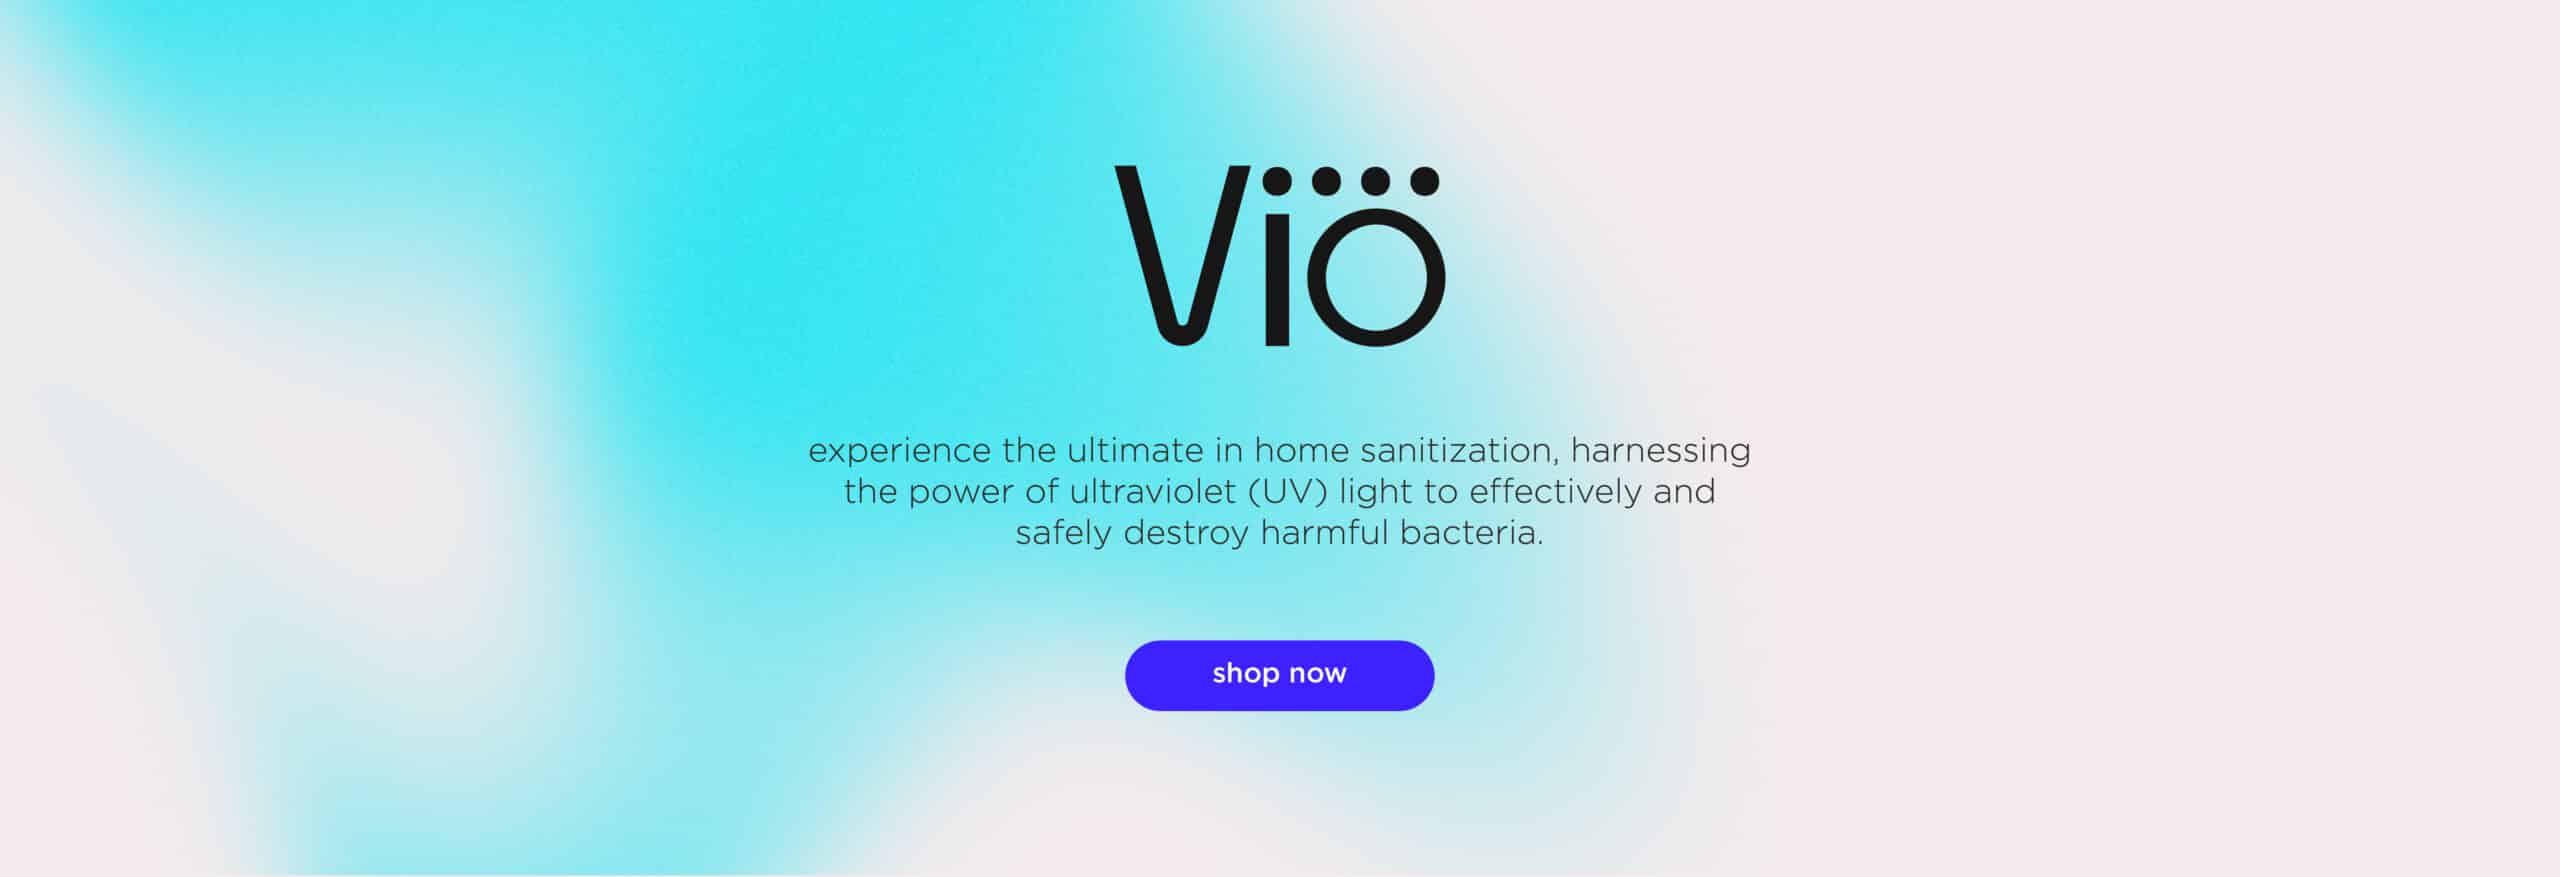 Vio experience the ultimate in home sanitation